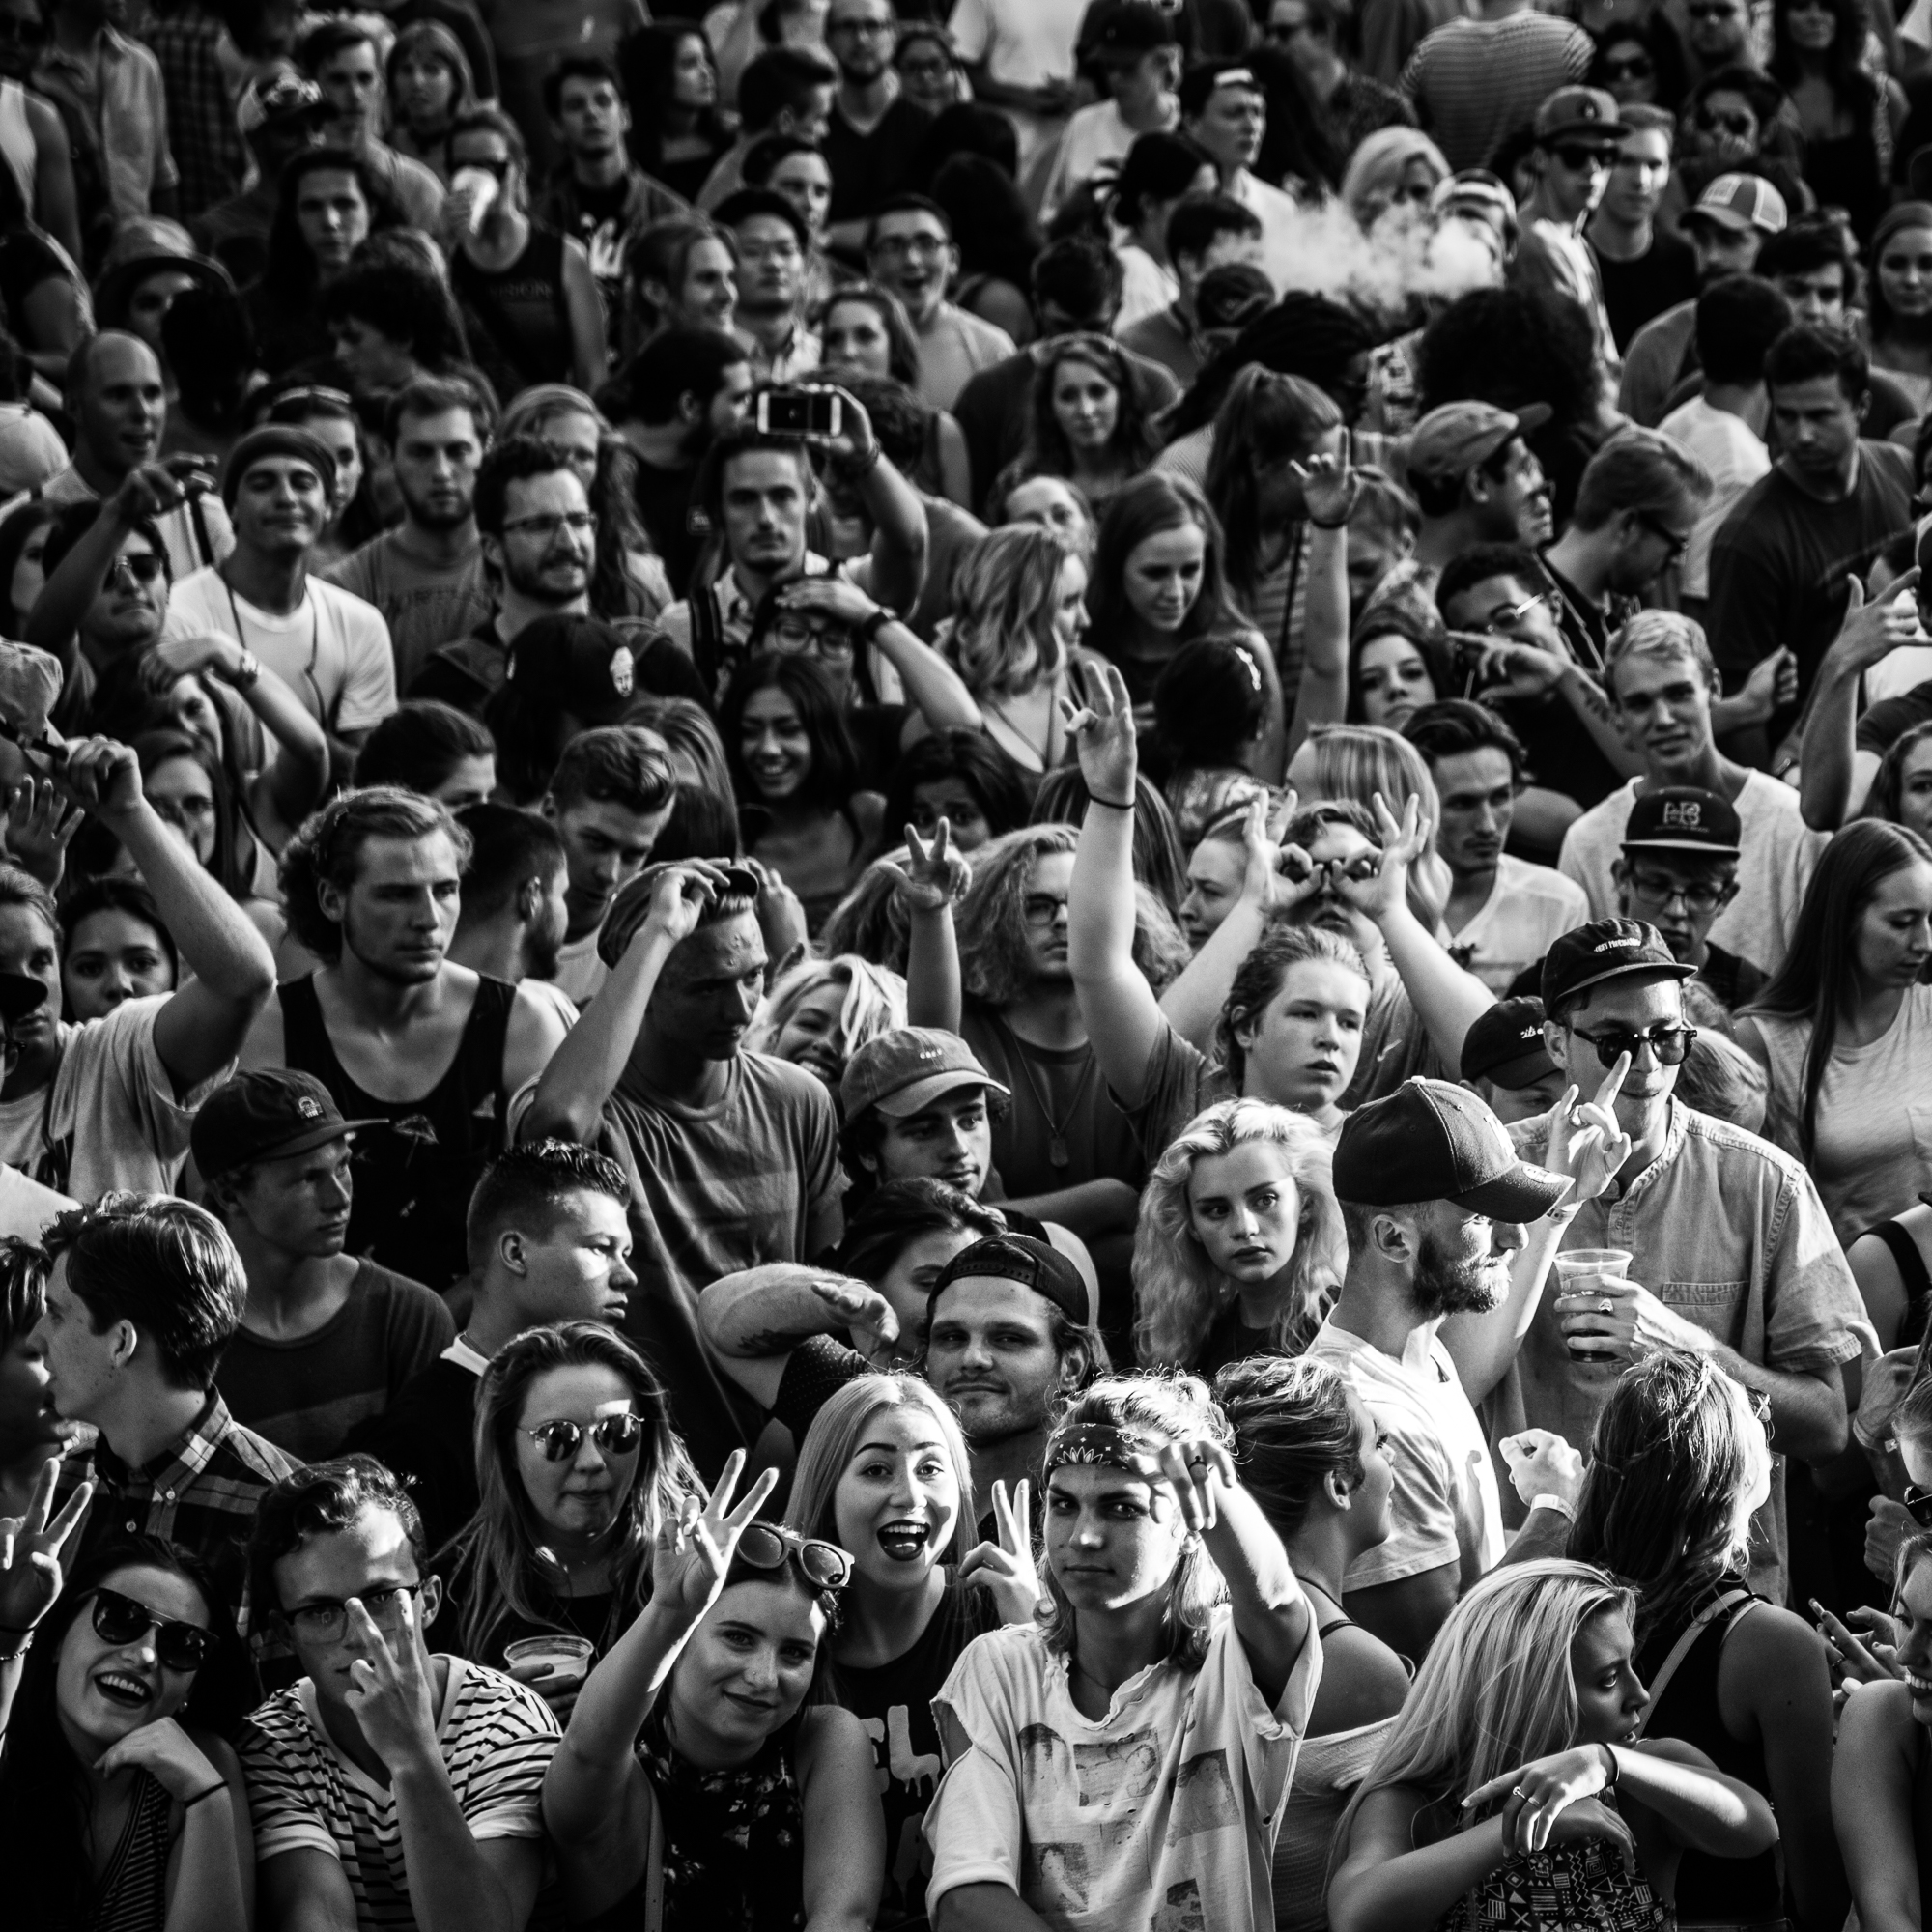 Crowd reacts during a performance at the Twilight Concert Series in Salt Lake City. - David Vogel Photography